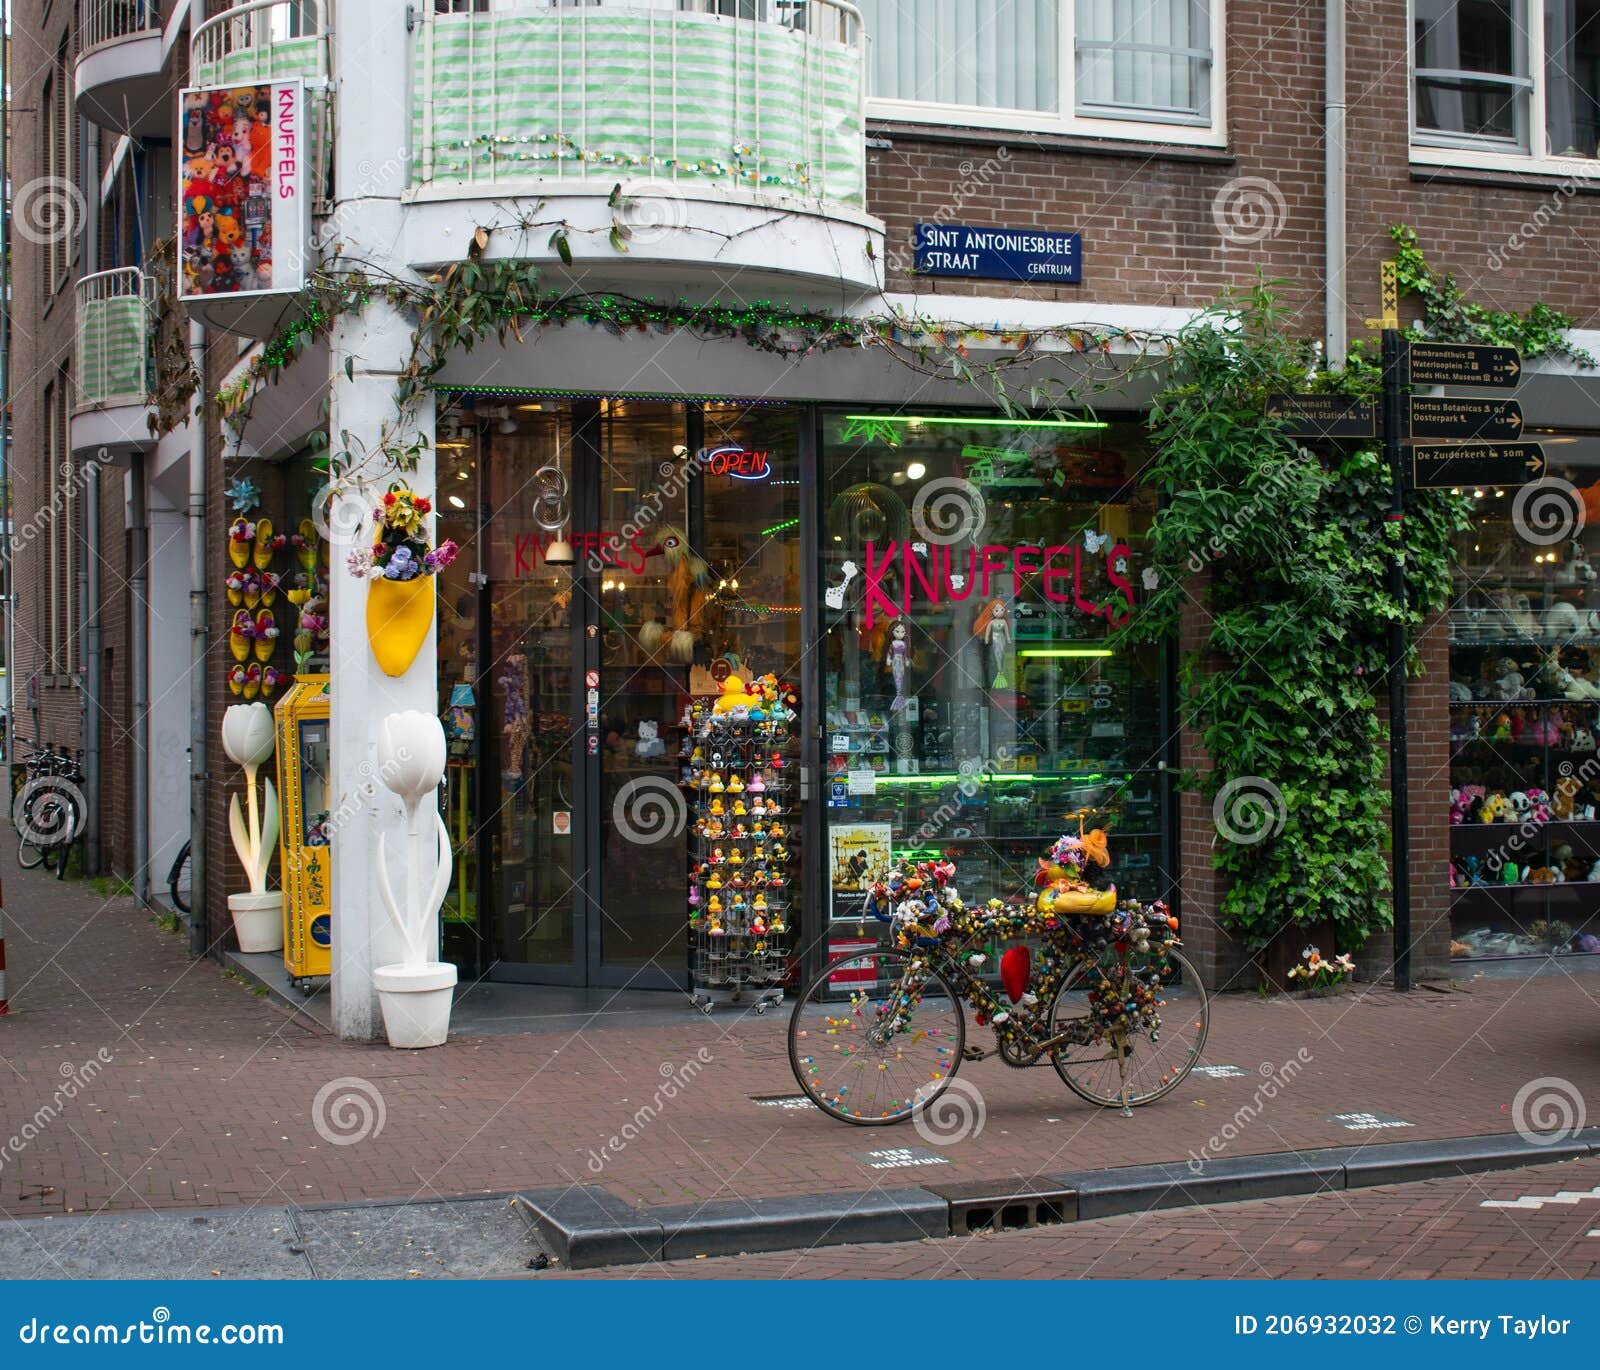 Pardon Ladder zondaar Knuffels Souvenir and Gift Shop in Amsterdam. Beautiful Colourful Shop  Front Editorial Photography - Image of flower, footwear: 206932032